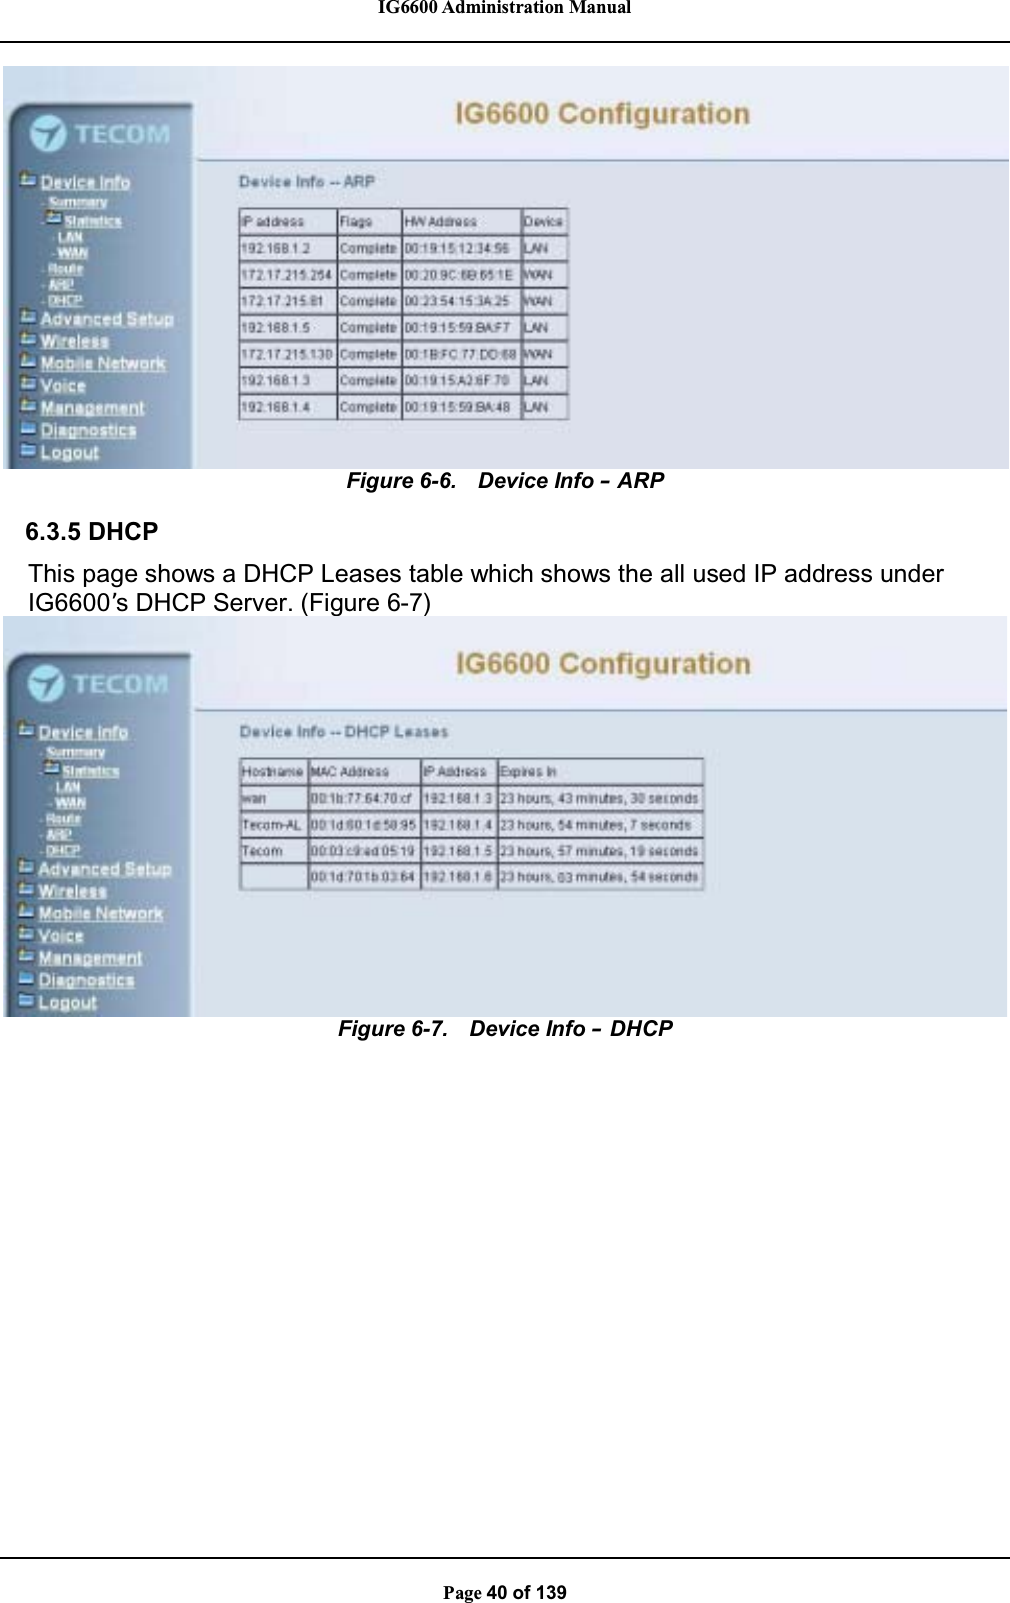 IG6600 Administration ManualPage 40 of 139Figure 6-6. Device Info –ARP6.3.5 DHCPThis page shows a DHCP Leases table which shows the all used IP address underIG6600’s DHCP Server. (Figure 6-7)Figure 6-7. Device Info –DHCP